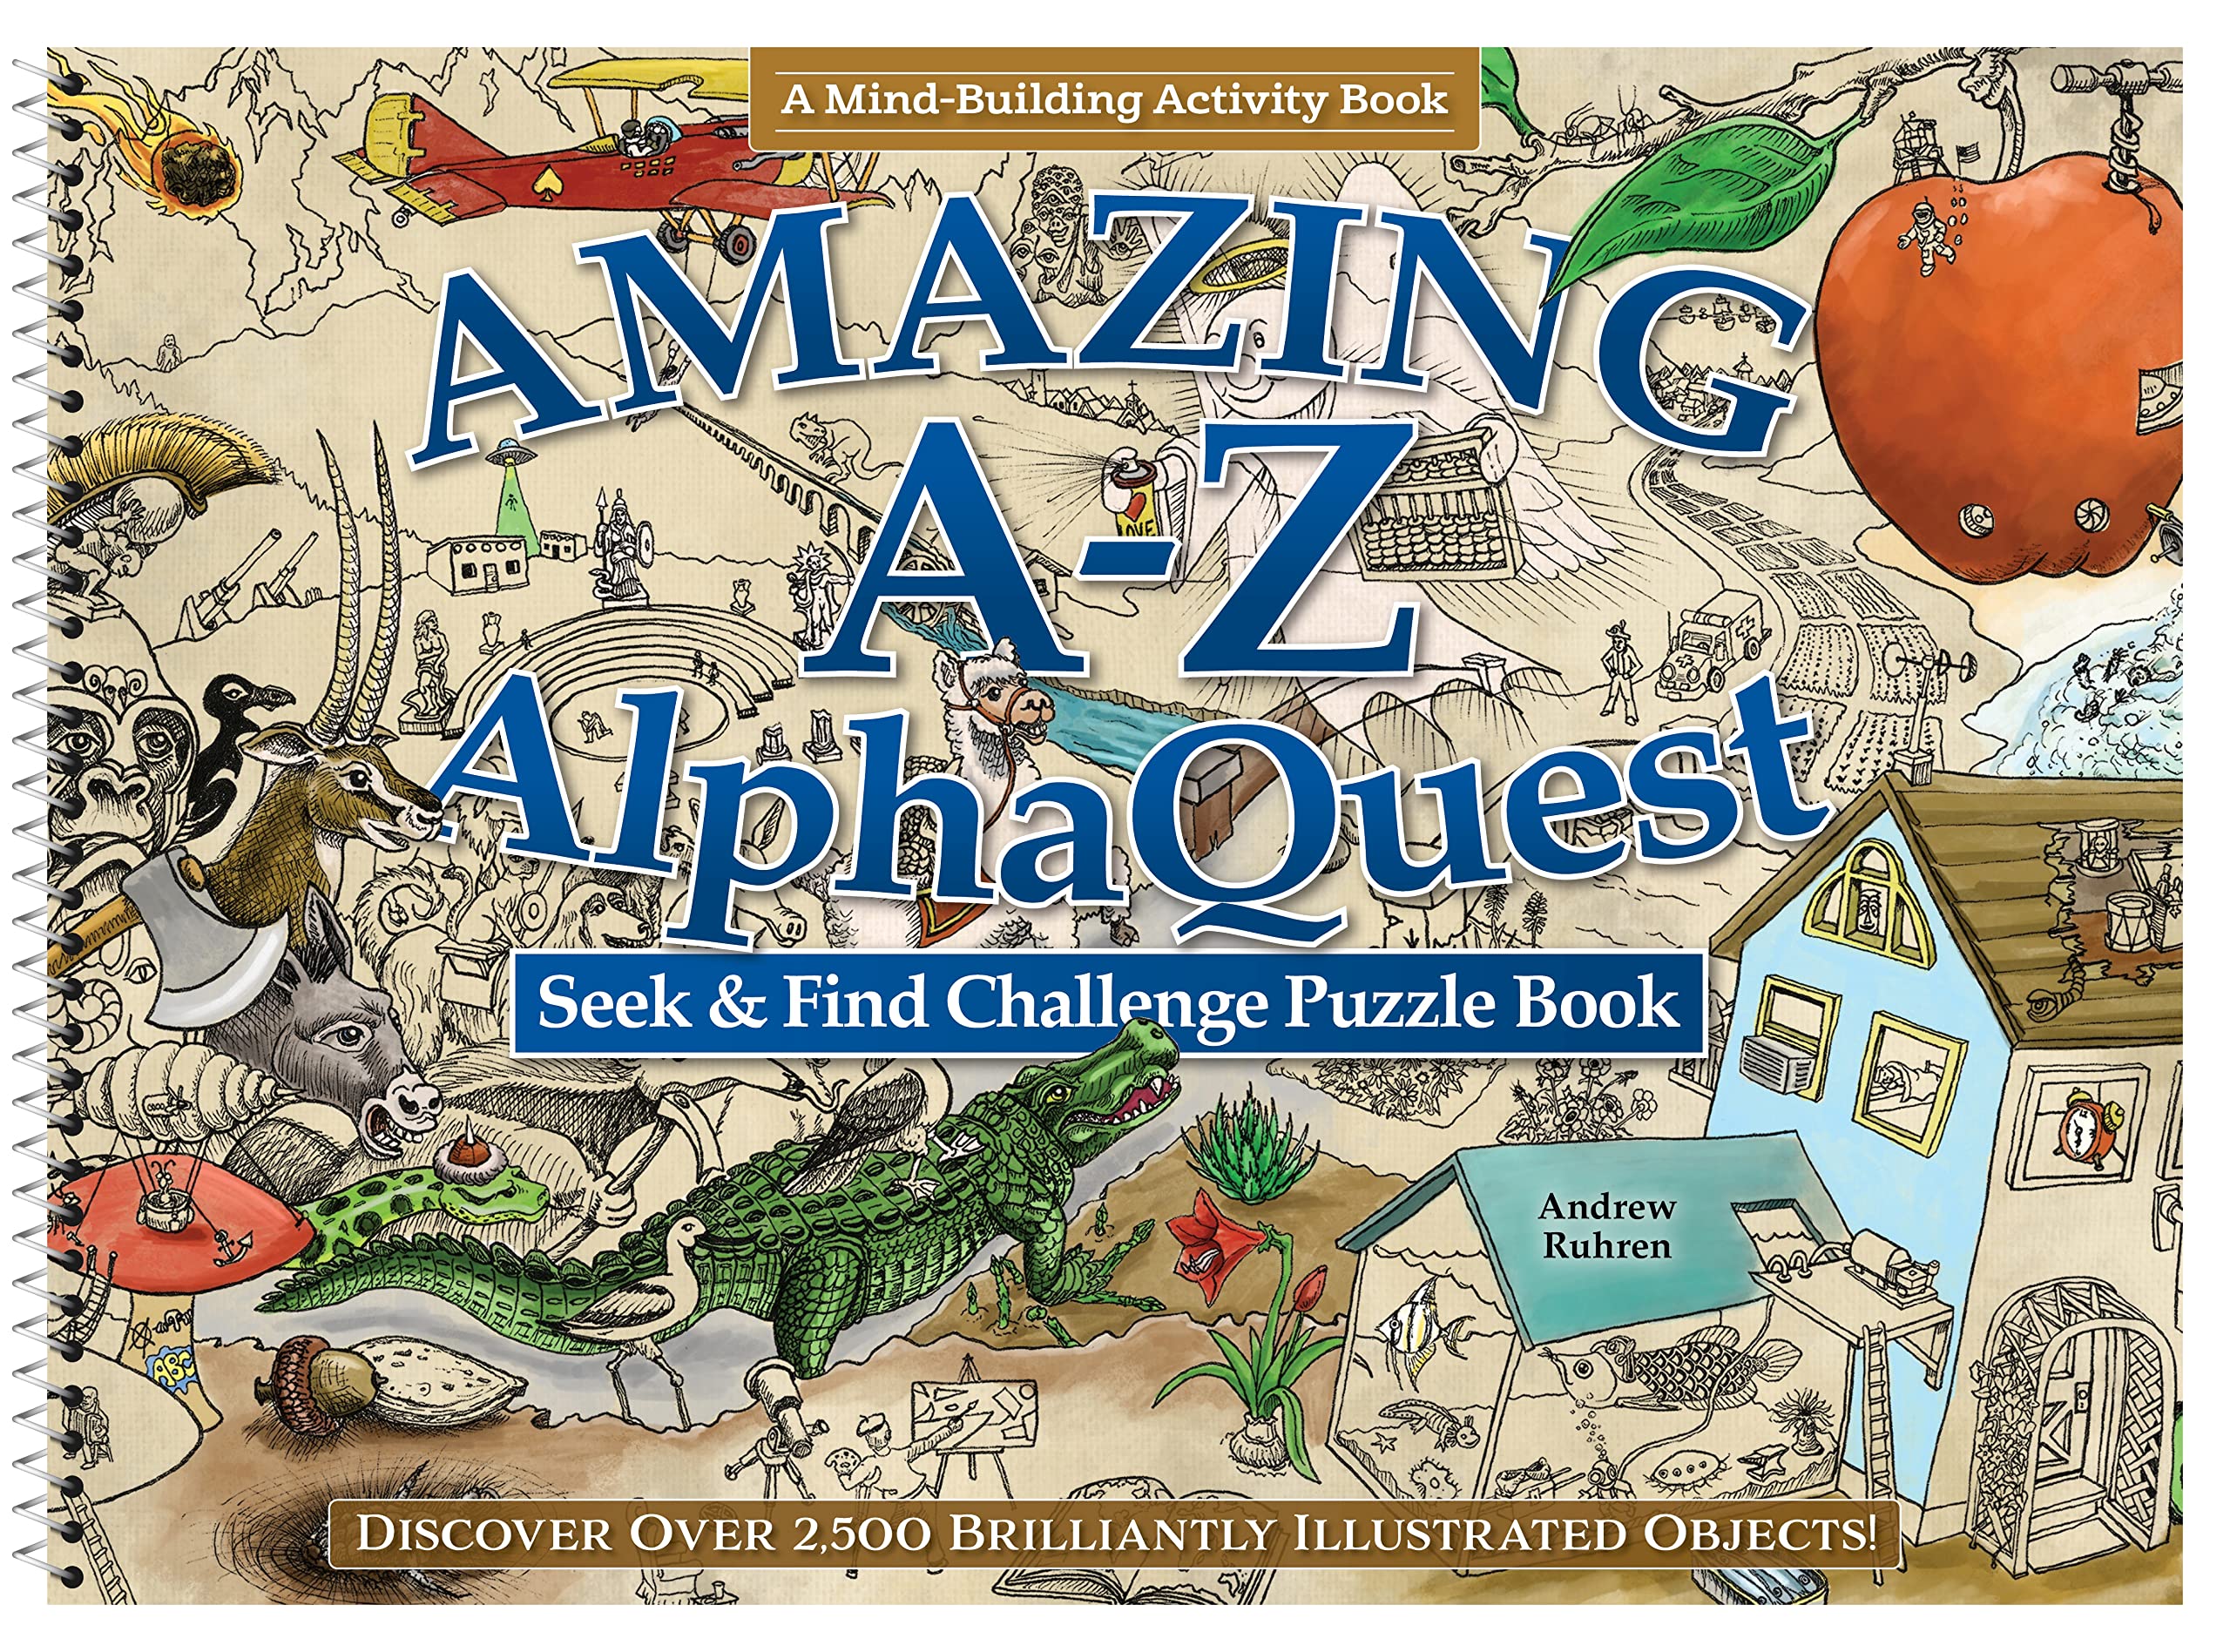 Amazing A-Z AlphaQuest Seek & Find Challenge Puzzle Book: Discover Over 2,500 Brilliantly Illustrated Objects! (Fox Chapel Publishing) 26 Puzzles with a Variety of Hidden Objects - Adult Activity Book